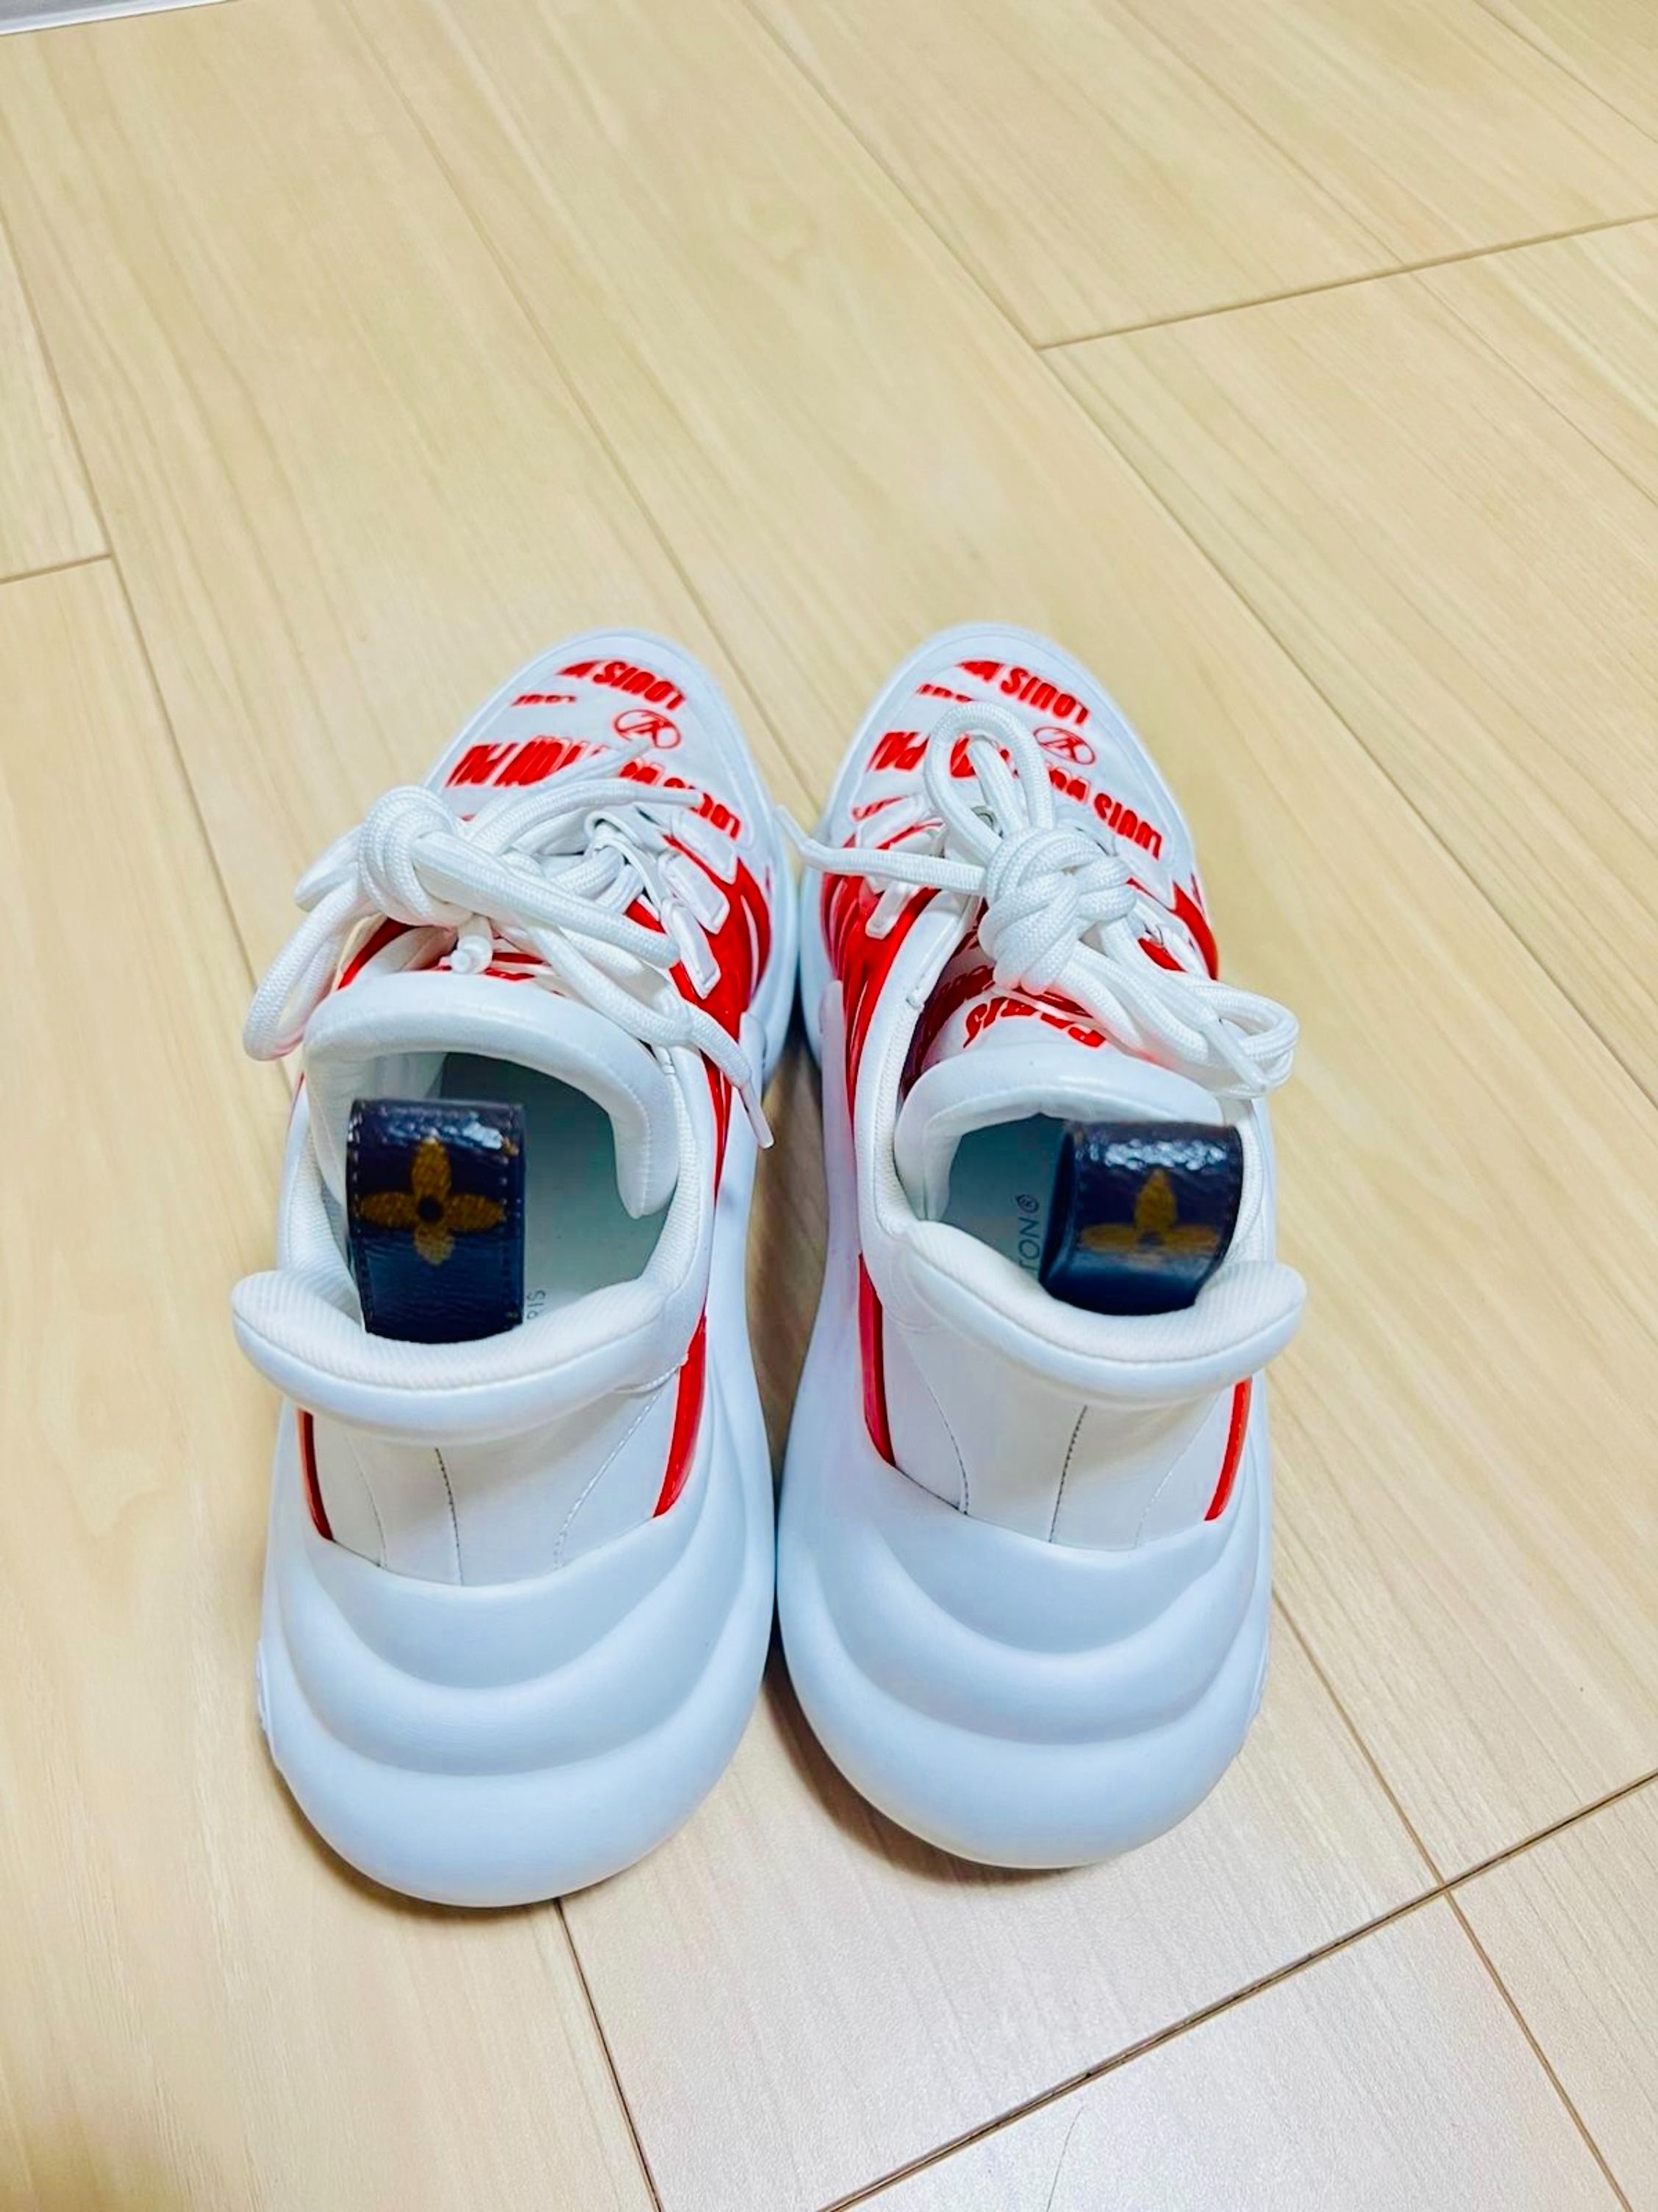 Almostnew-woLouis Vuitton Sneaker LV Archelight Red